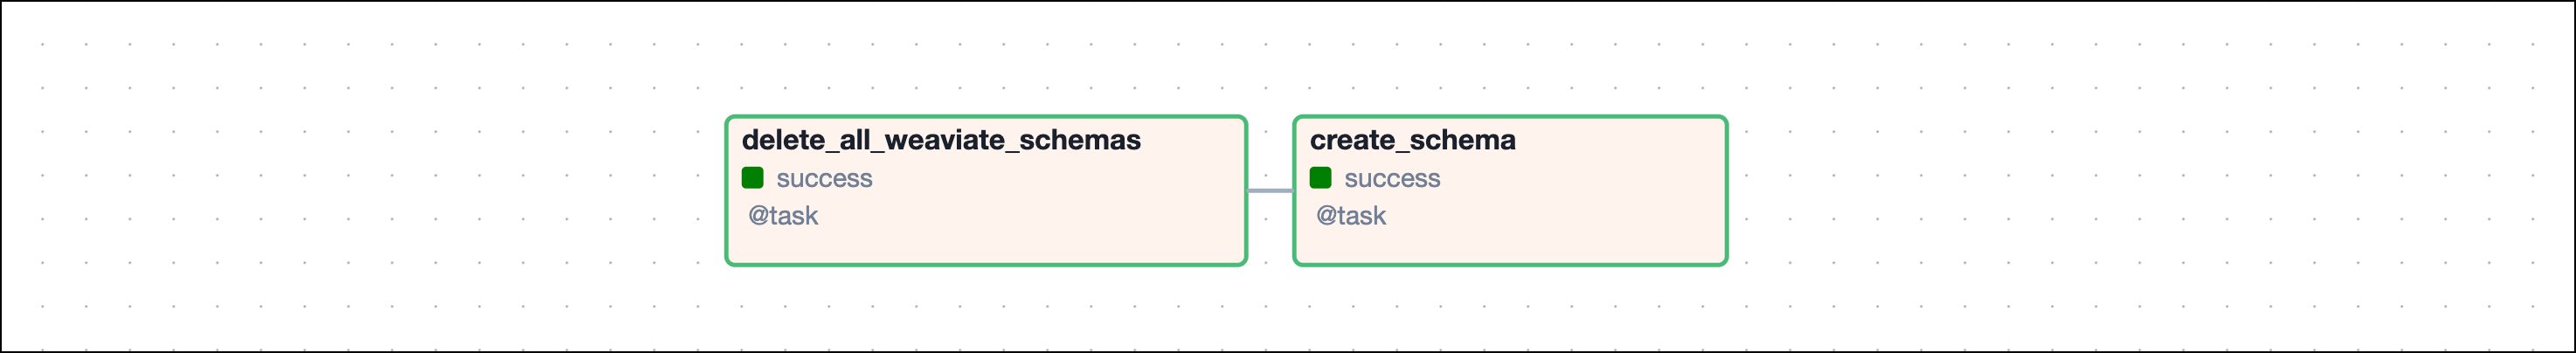 Graph view of the create_schema DAG showing two tasks, one to delete all existing schemas in a Weaviate database, another to create a news schema.